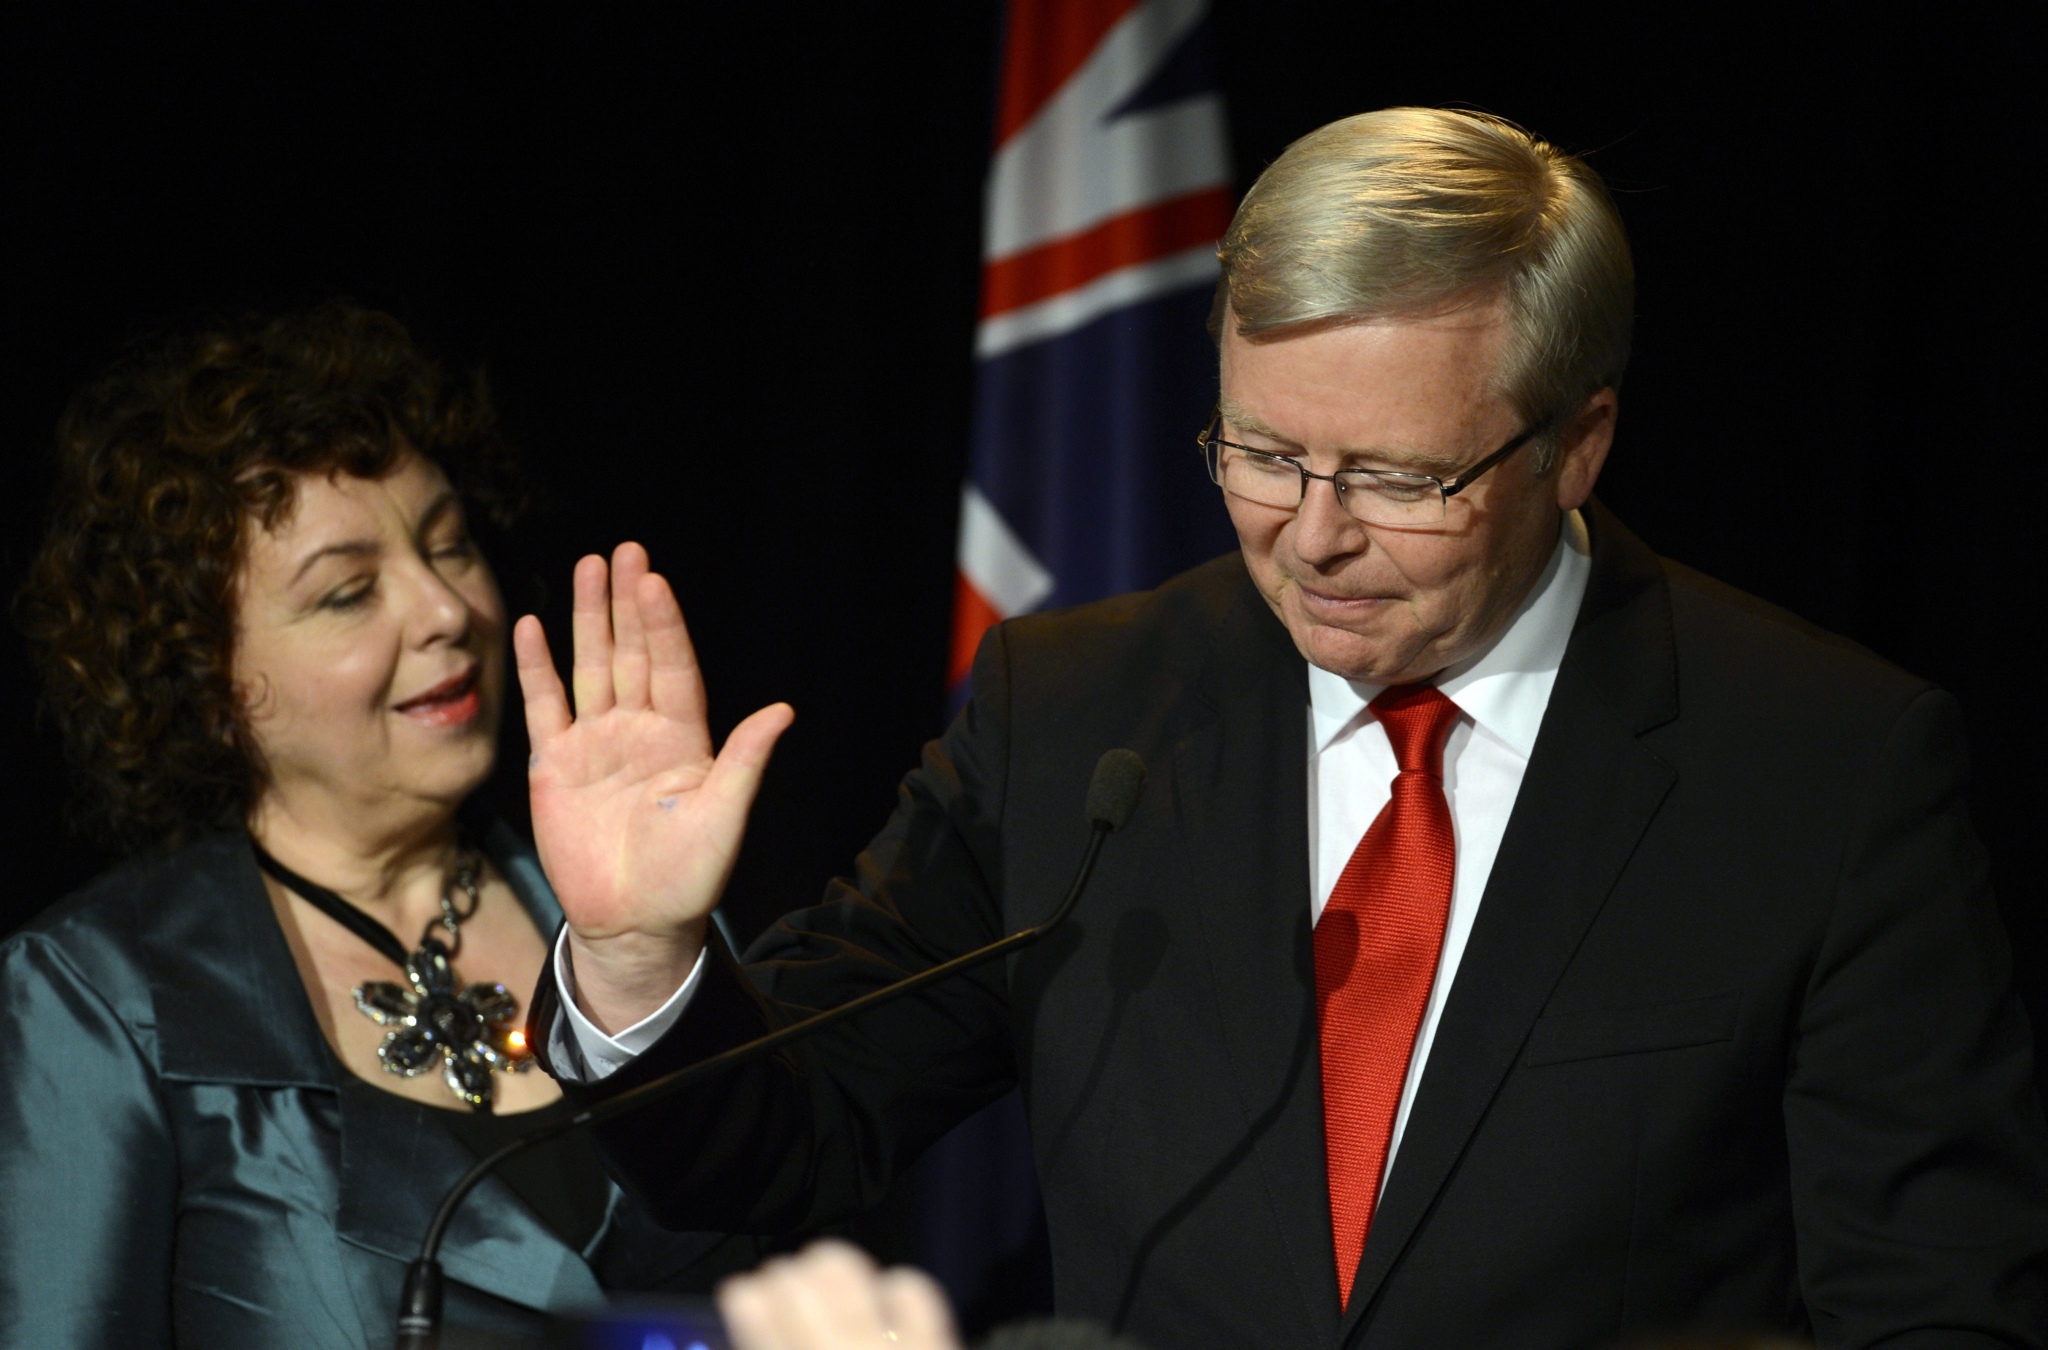  epa03855844 Outgoing Austrialian Prime Minister Kevin Rudd concedes defeat during the Labor Party's election night event in Brisbane. Photo: EPA